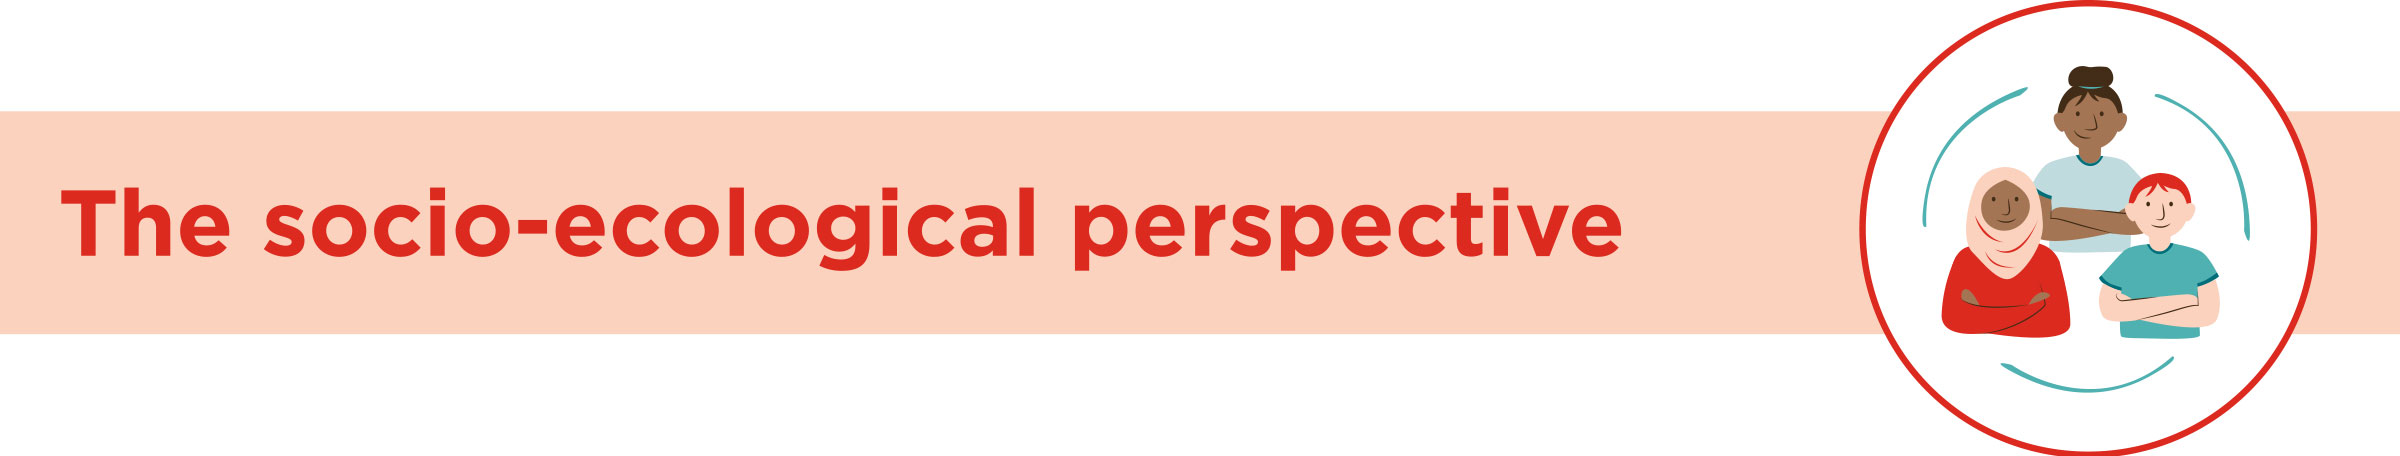 A header for the socio-ecological perspective containing the socio-ecological perspective icon; three people in a group surrounded by a circle